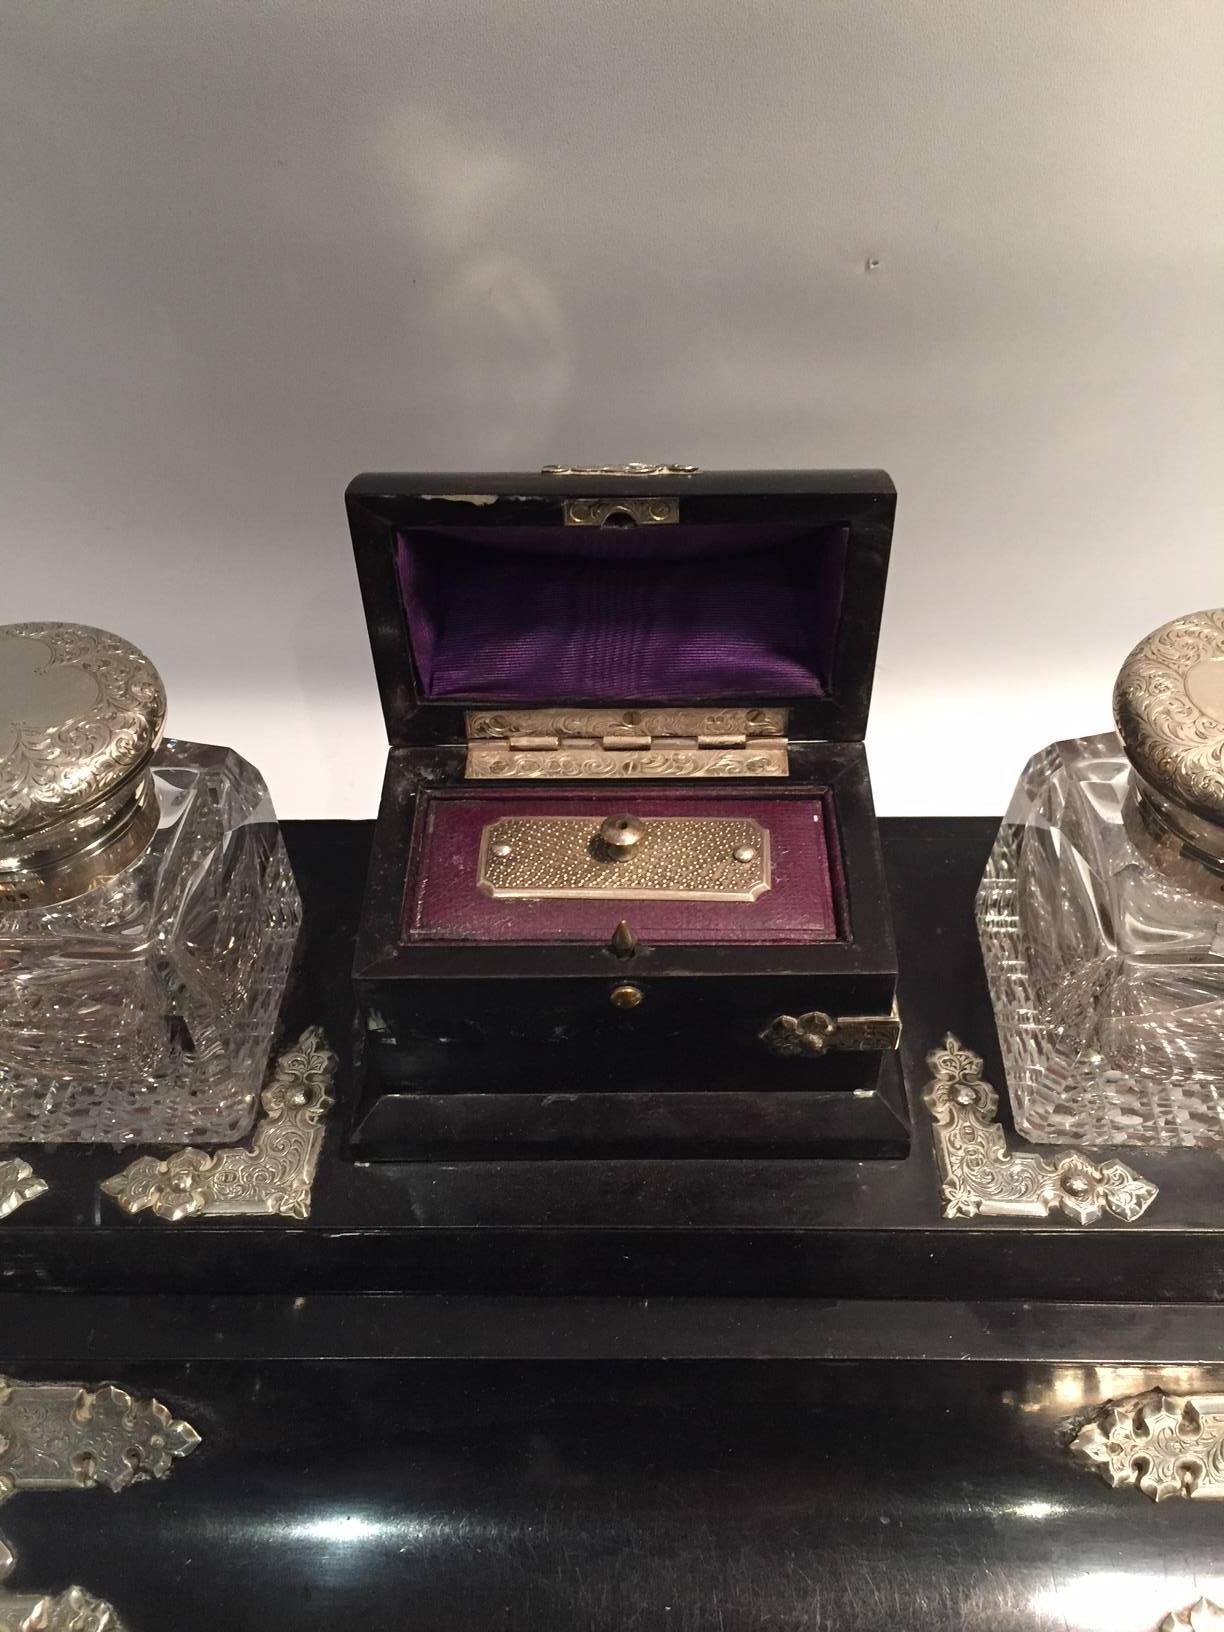 Crystal, sterling silver, and ebonized wood inkwell desk set by George Bedingham, Great Britain, 1870.
The set consists of two crystal and sterling-silver-hinged inkwells, a pen holder, and a small chest for metal nibs. Compartment storage is